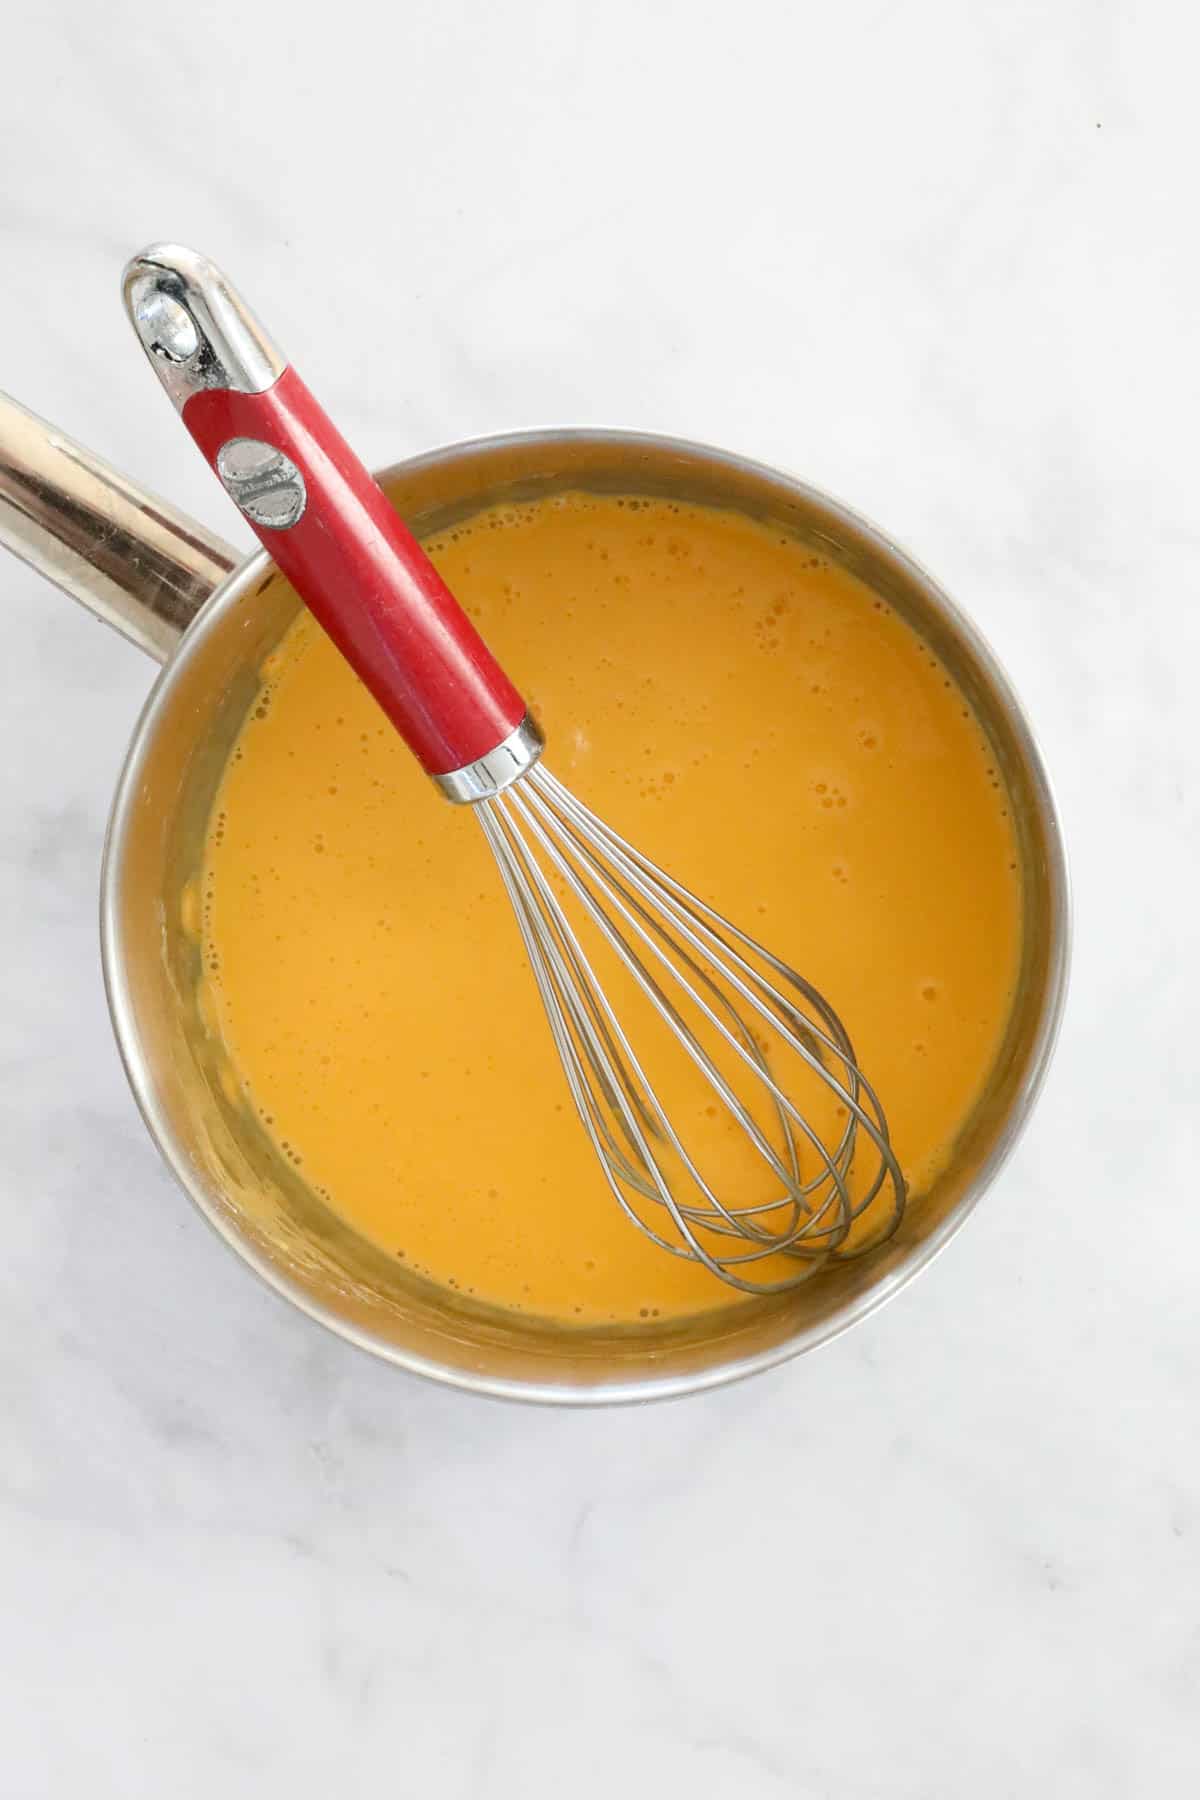 Custard ingredients whisked together in a saucepan.